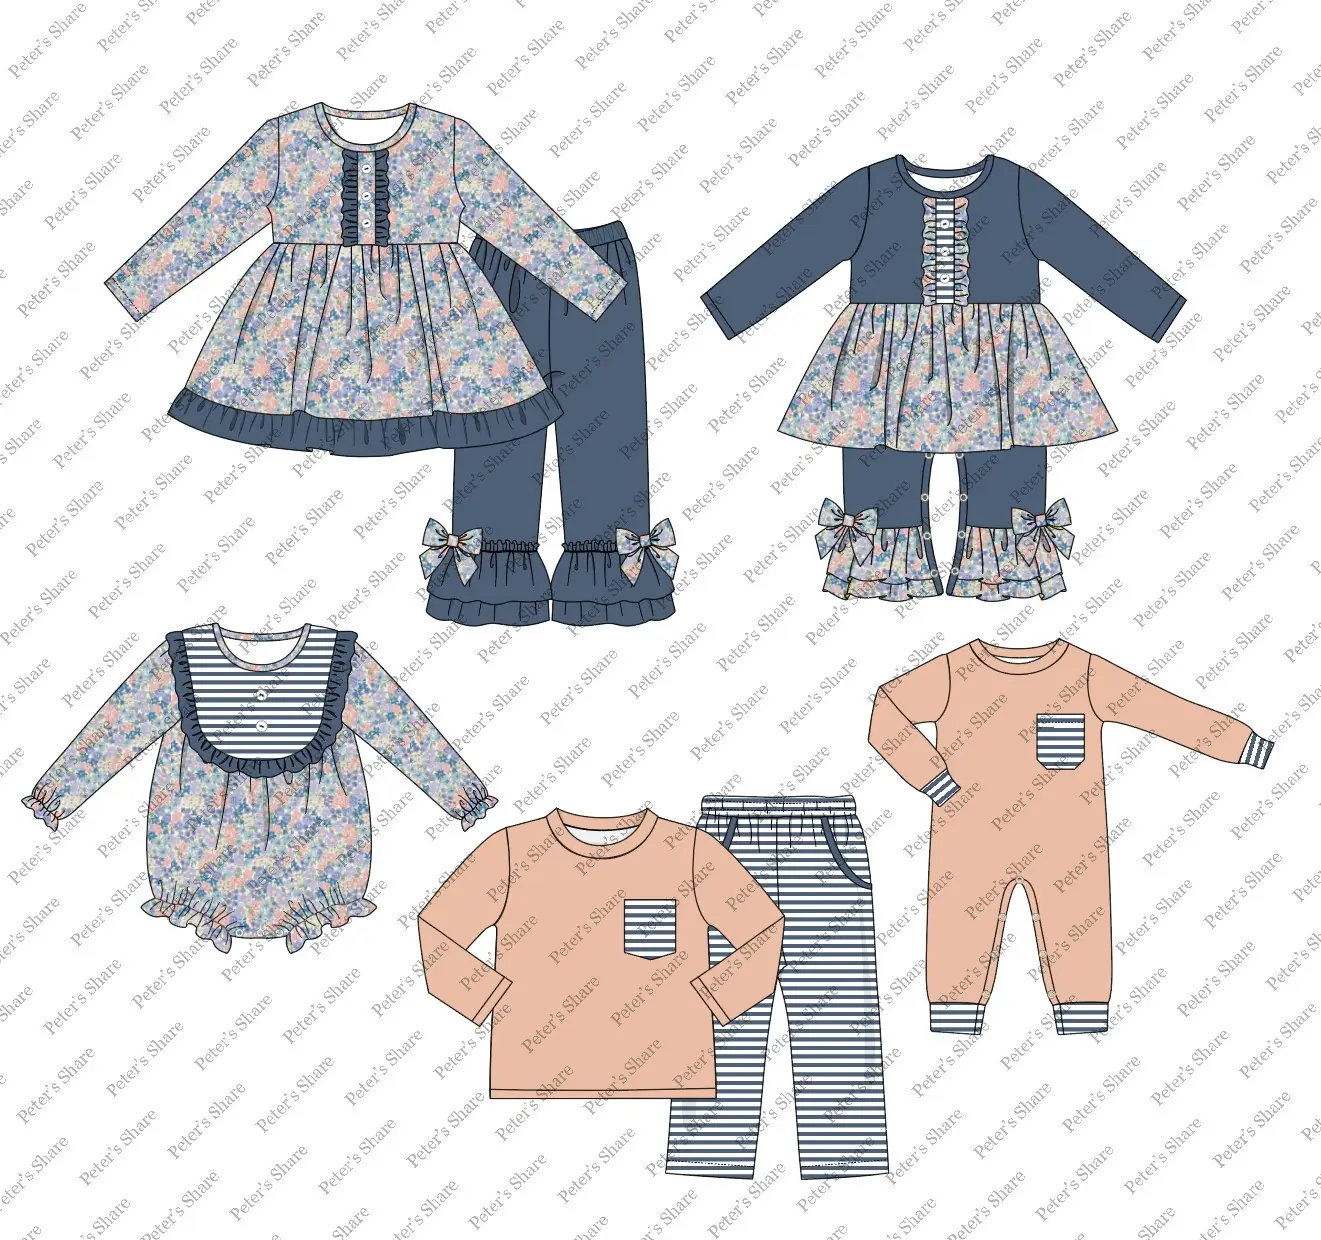 2022 new design floral fashion simple girl set Boutique baby clothing Casual children's clothing